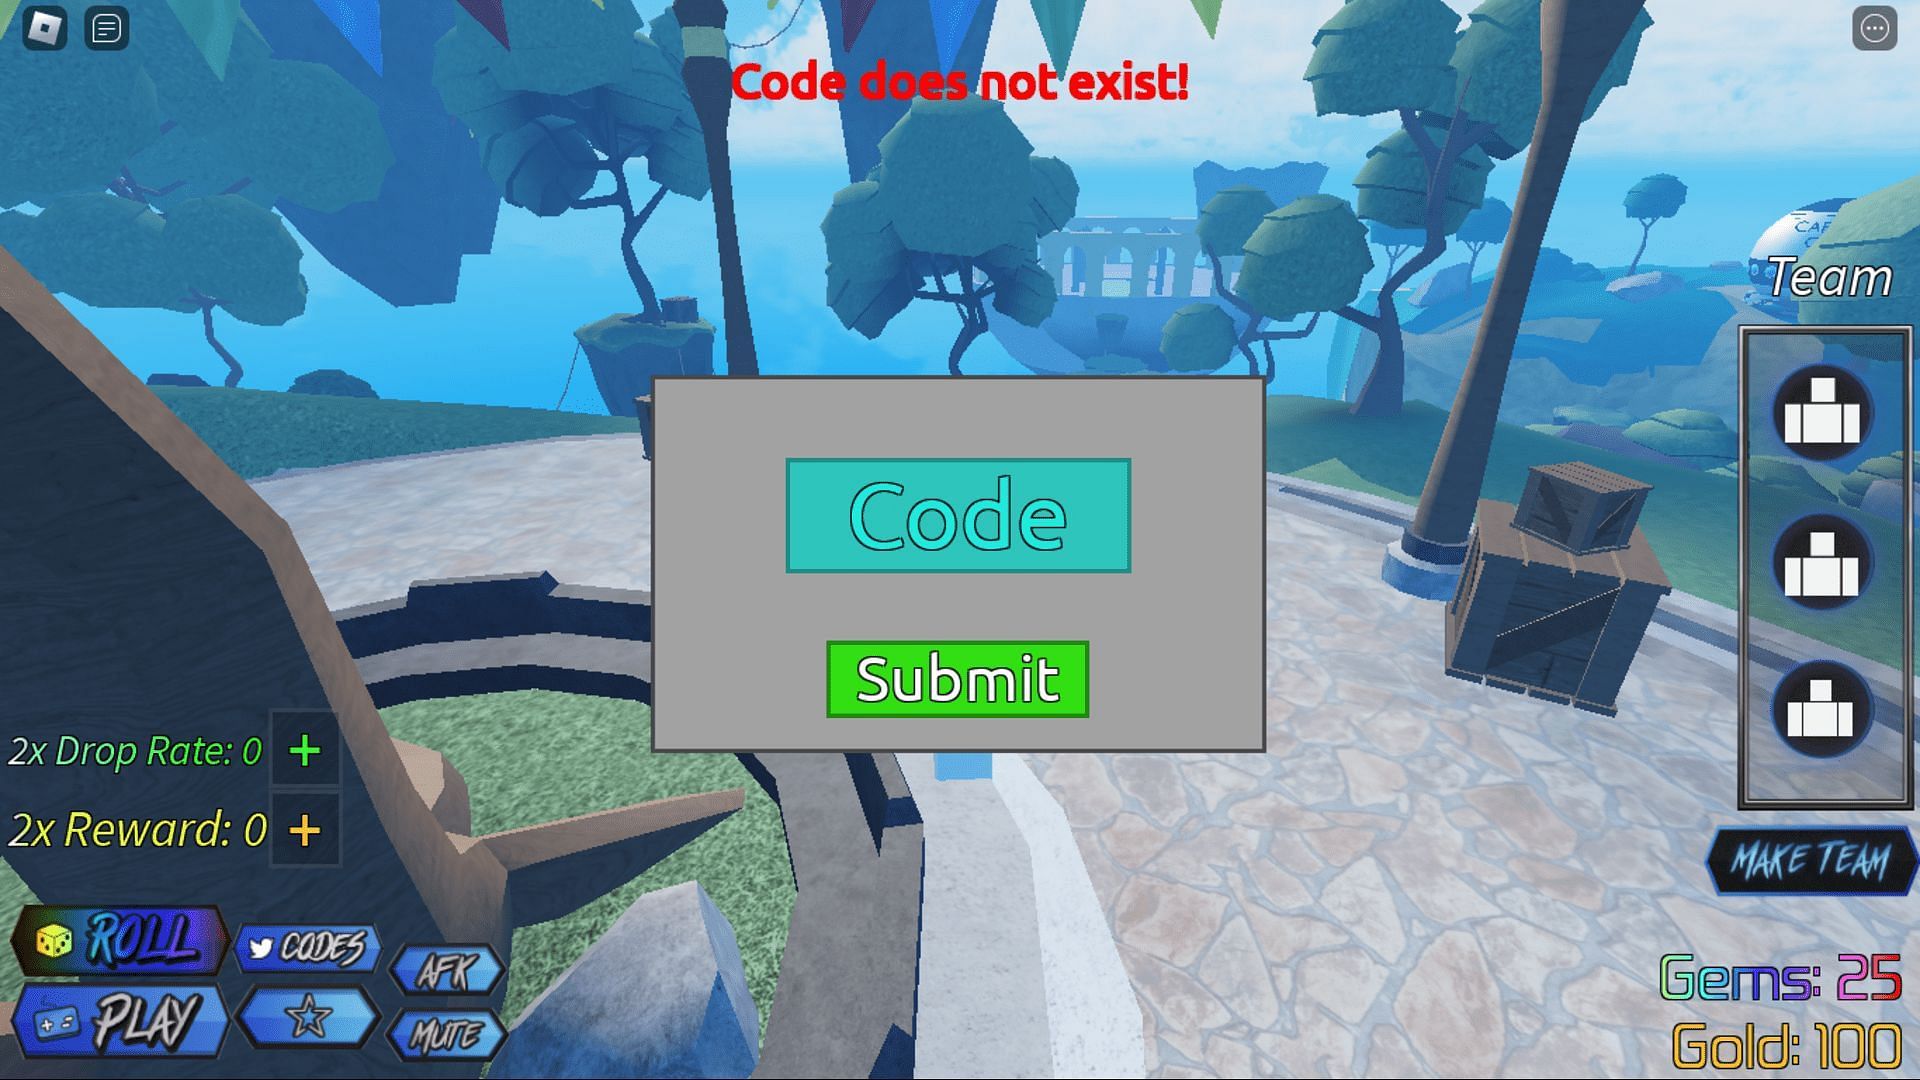 Troubleshoot codes in Anime Mania with ease (Image via Roblox)